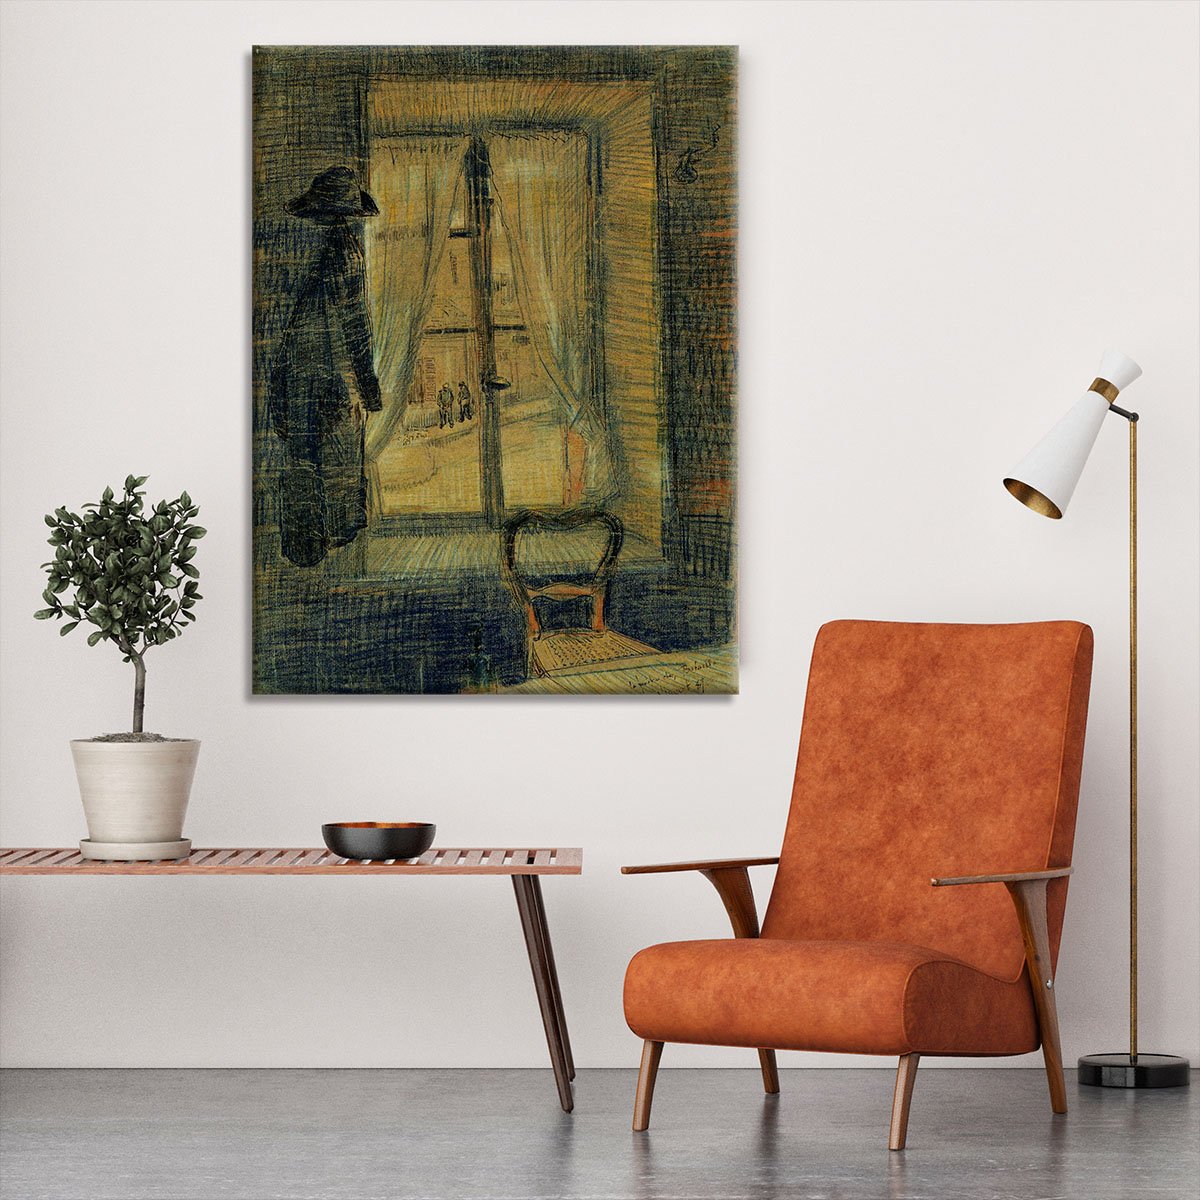 Window in the Bataille Restaurant by Van Gogh Canvas Print or Poster